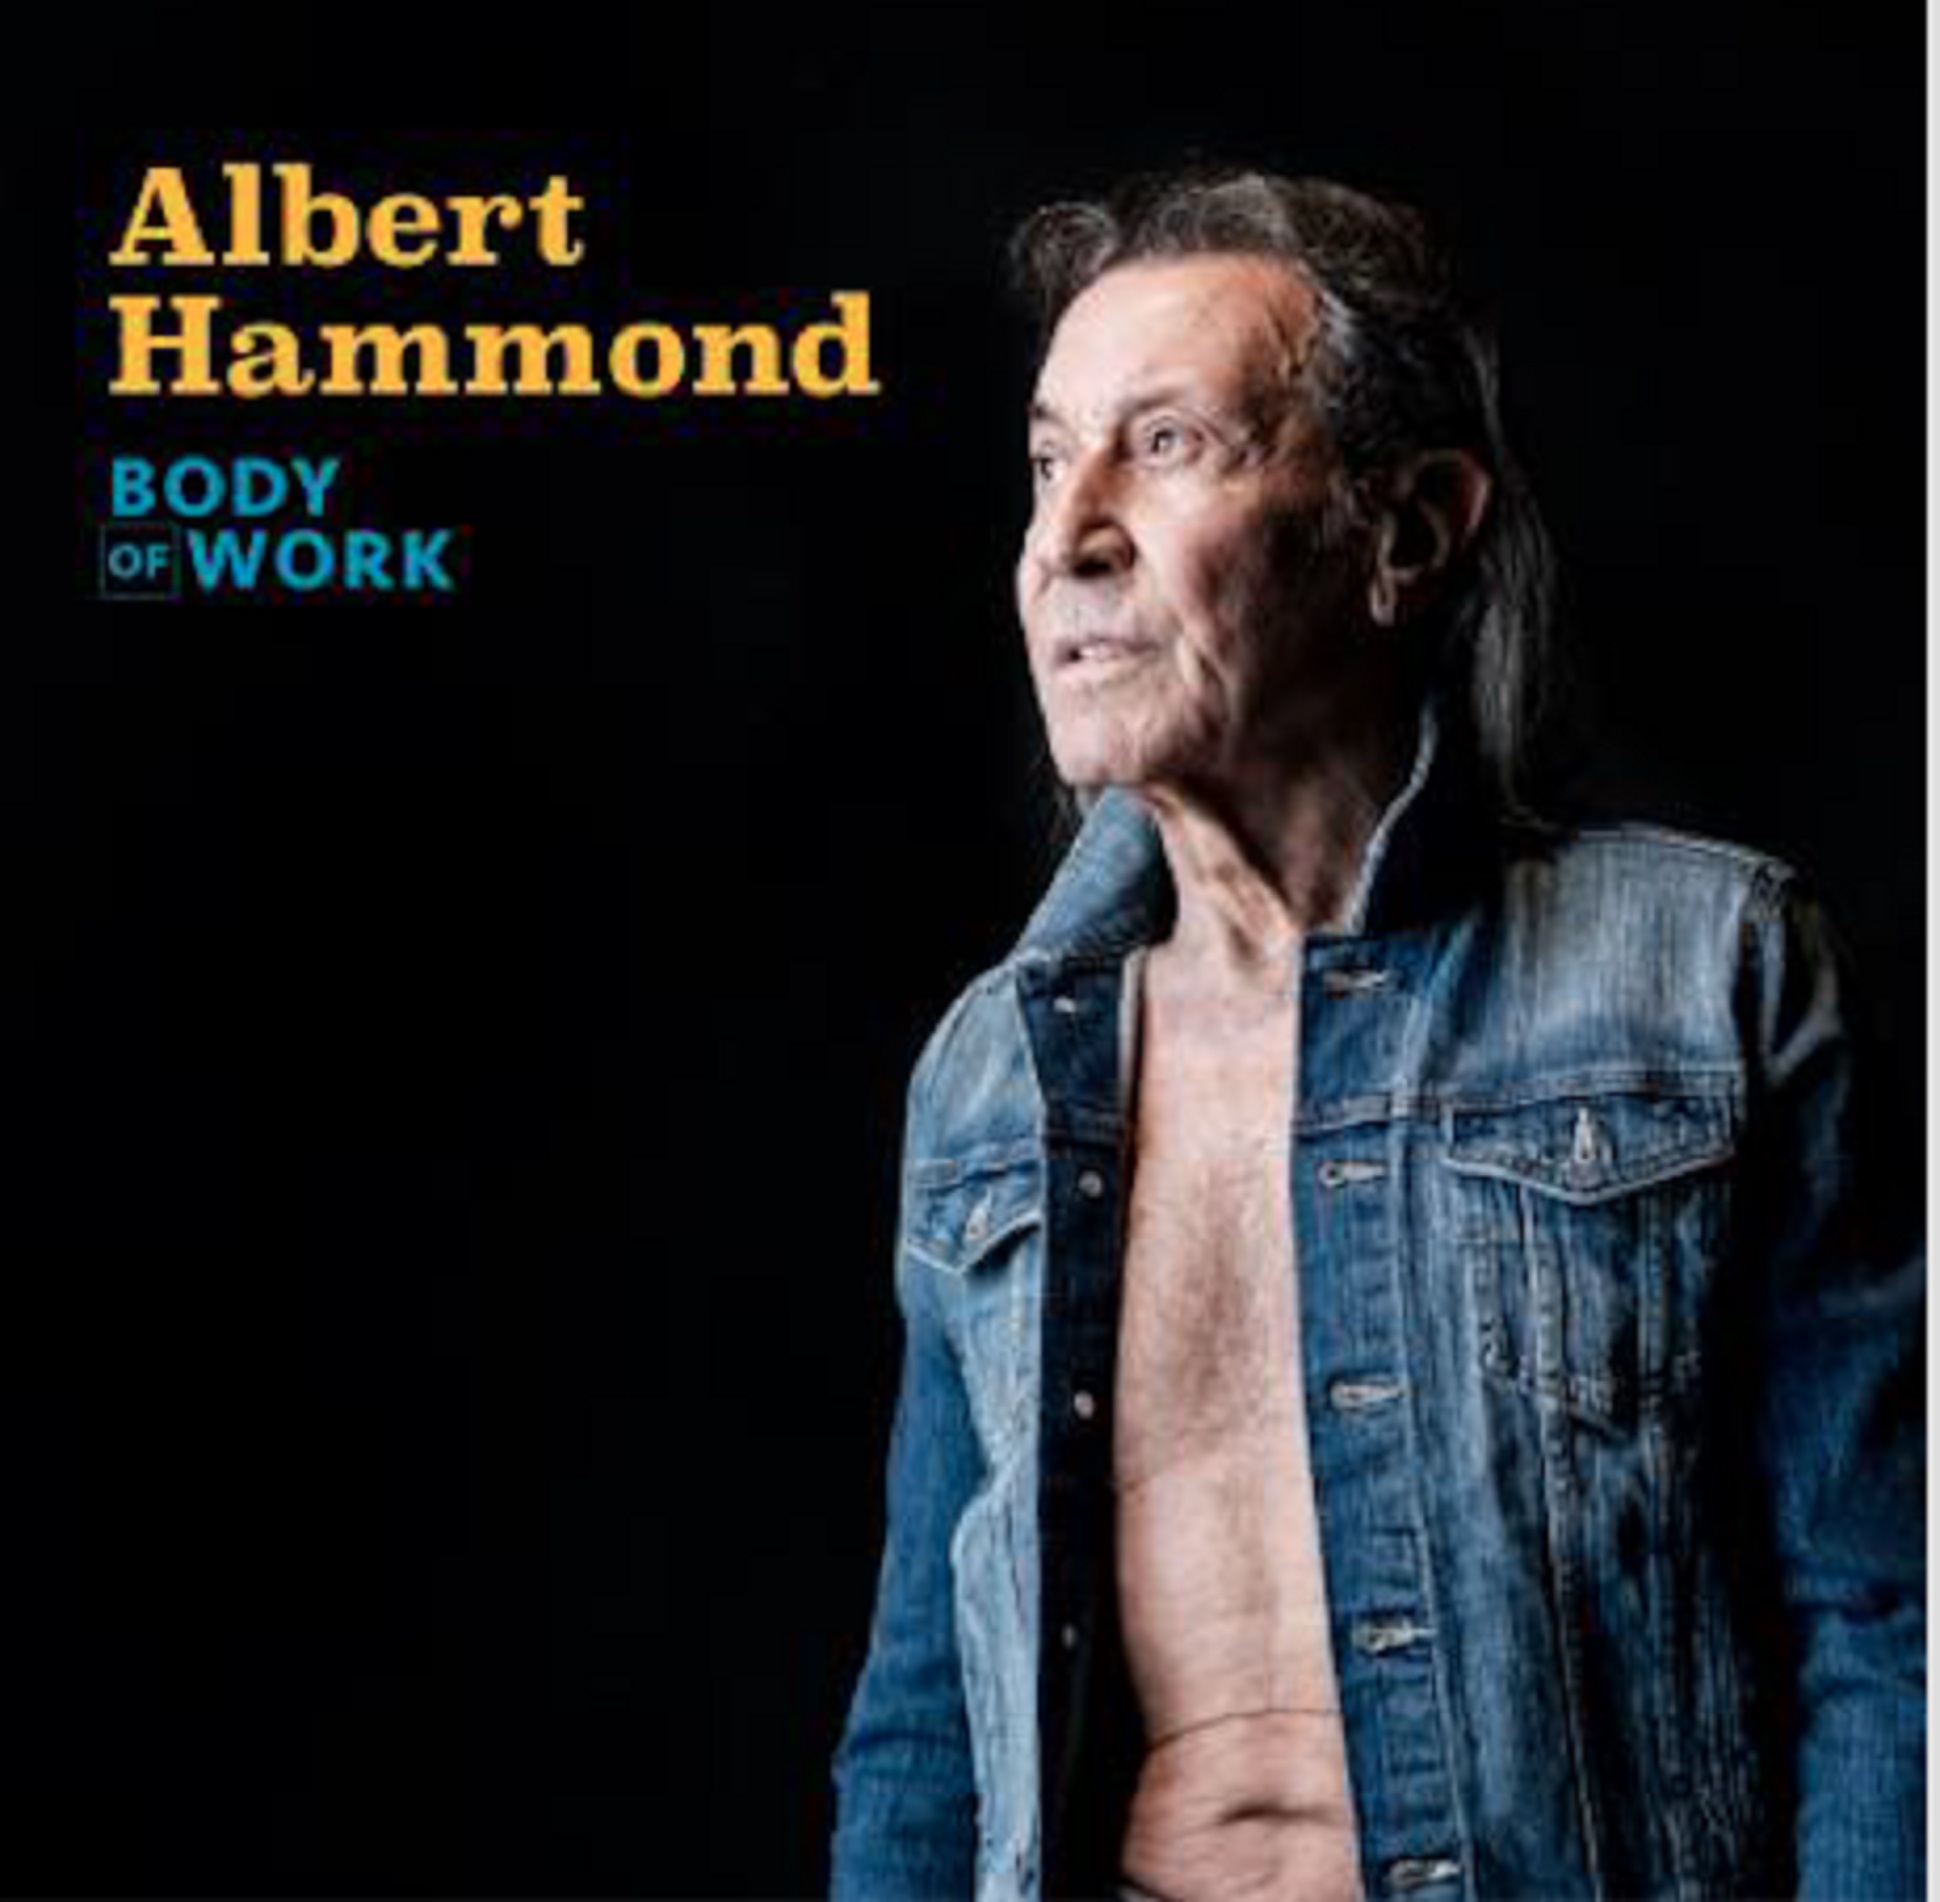 Albert Hammond Releases New Single "Gonna Save The World" - New Album "Body Of Work" Set for March 1st 2024